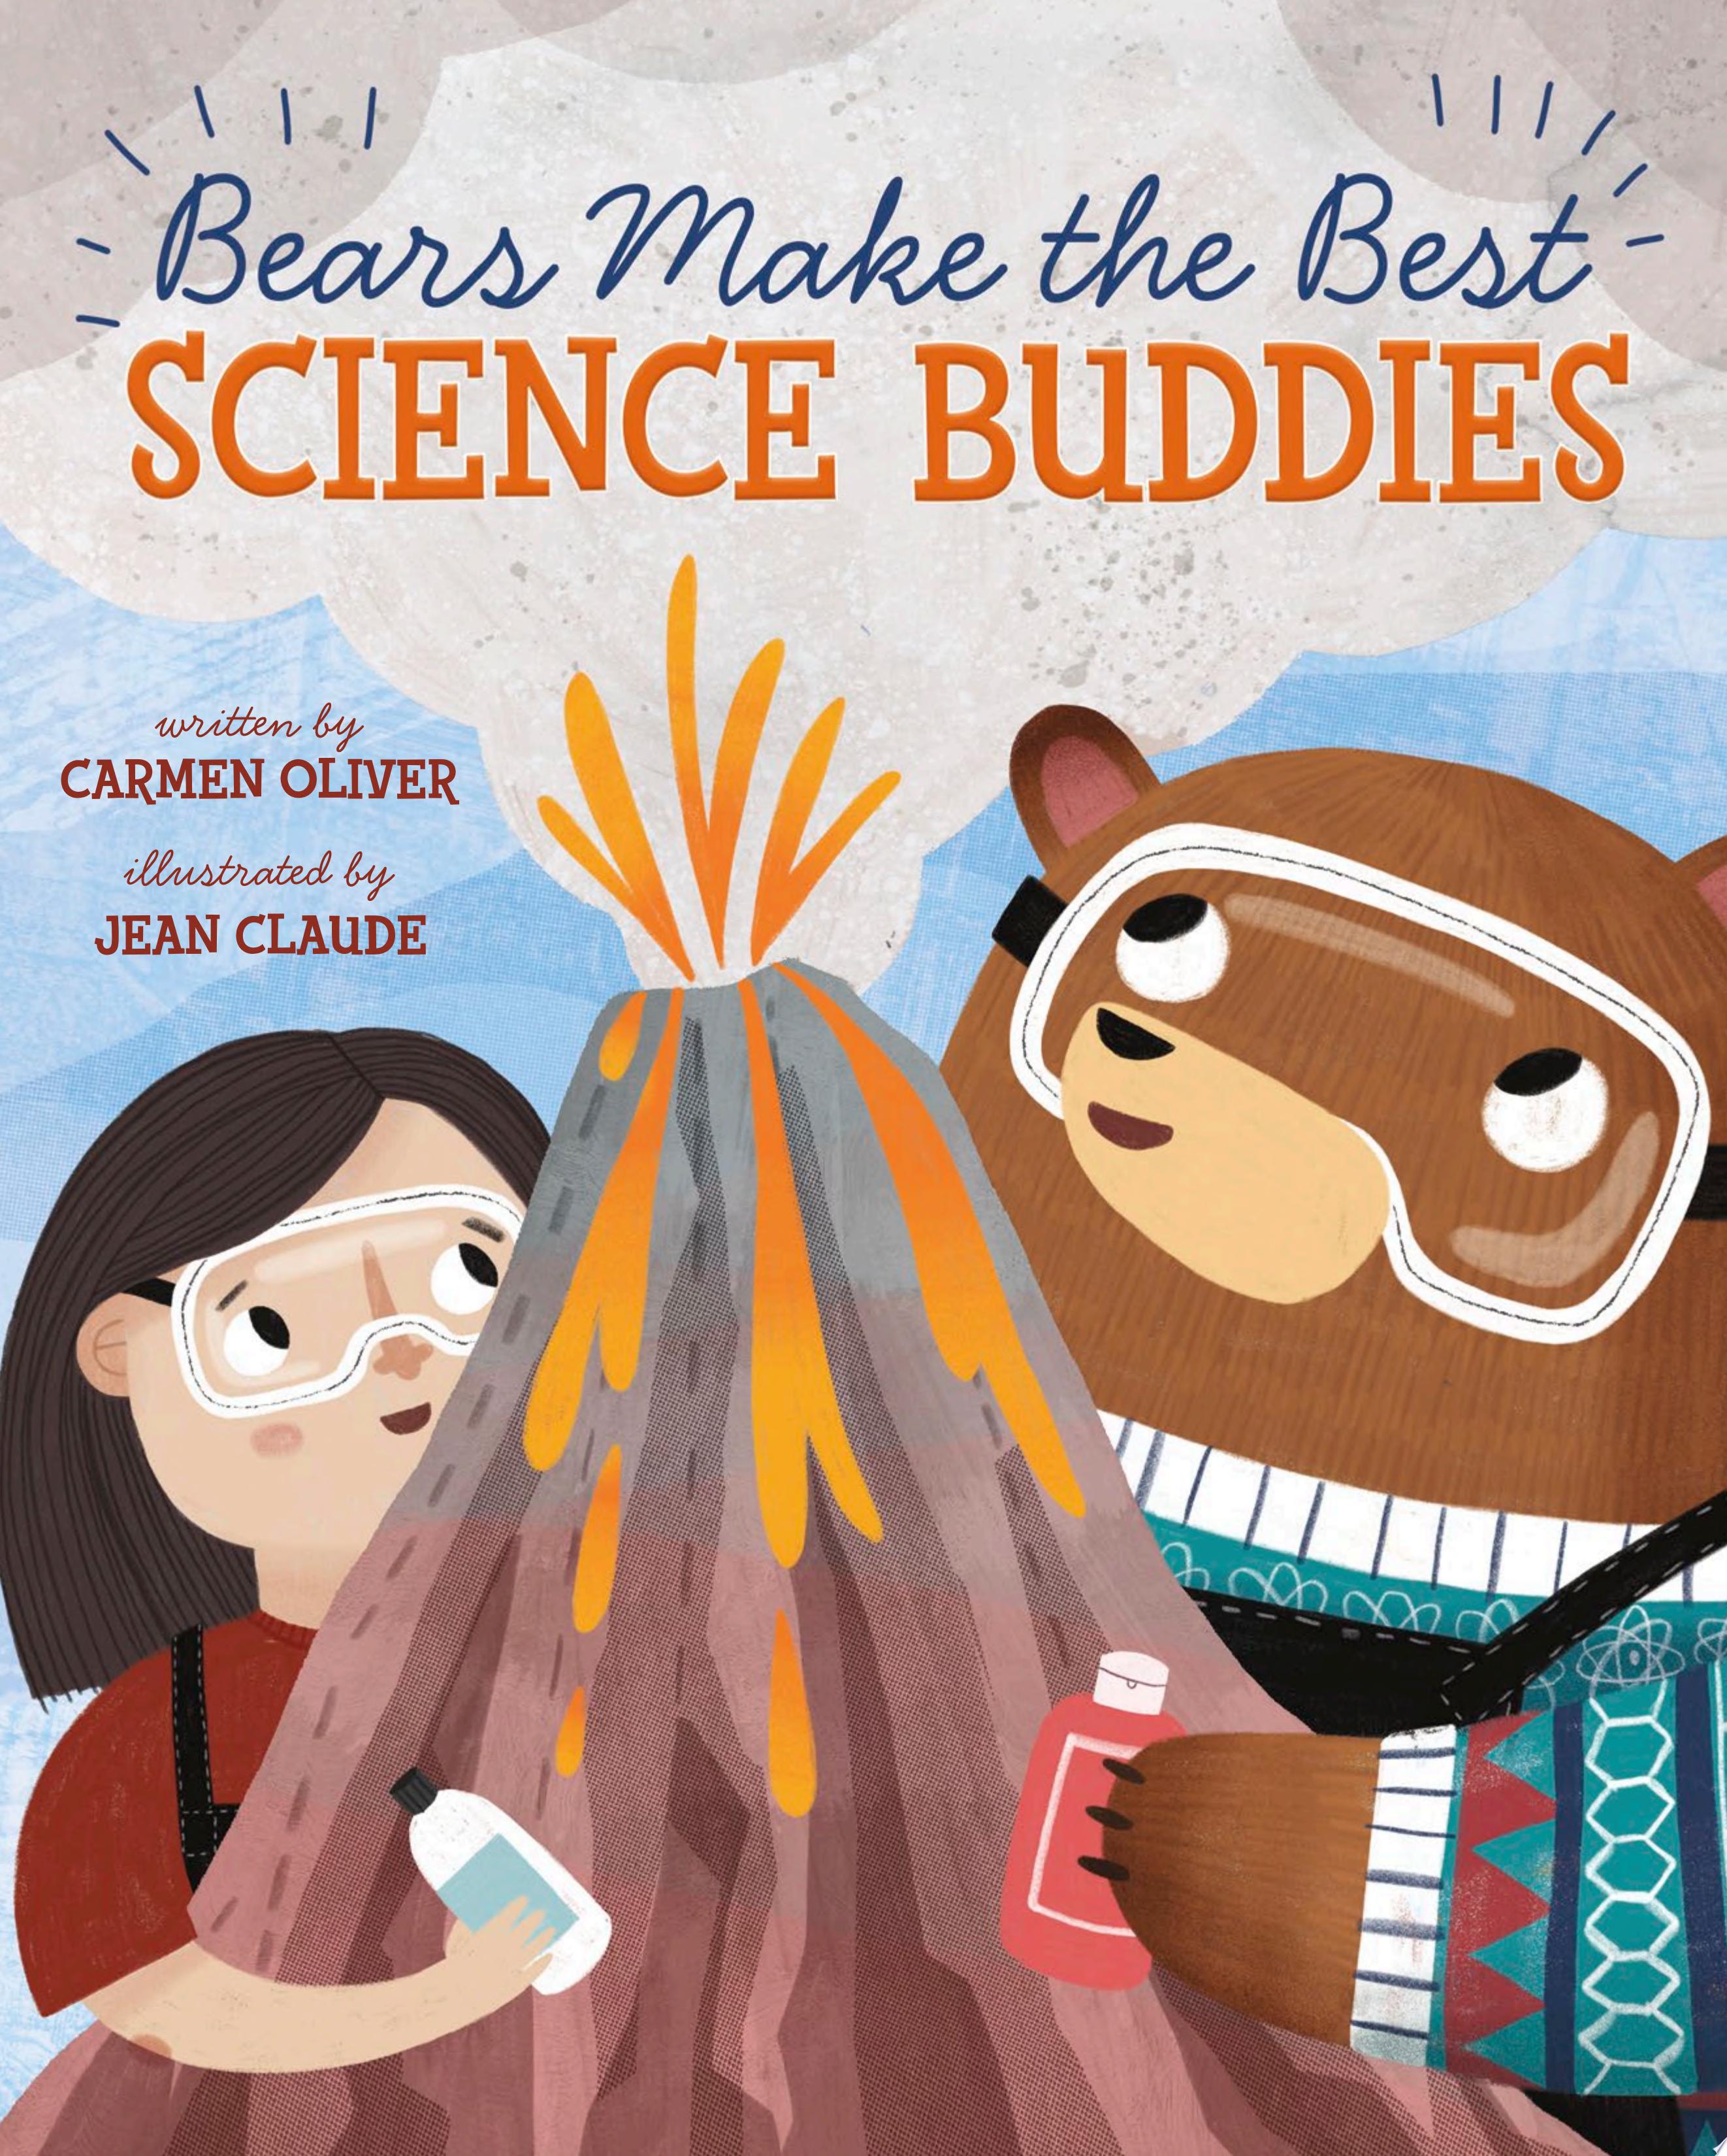 Image for "Bears Make the Best Science Buddies"